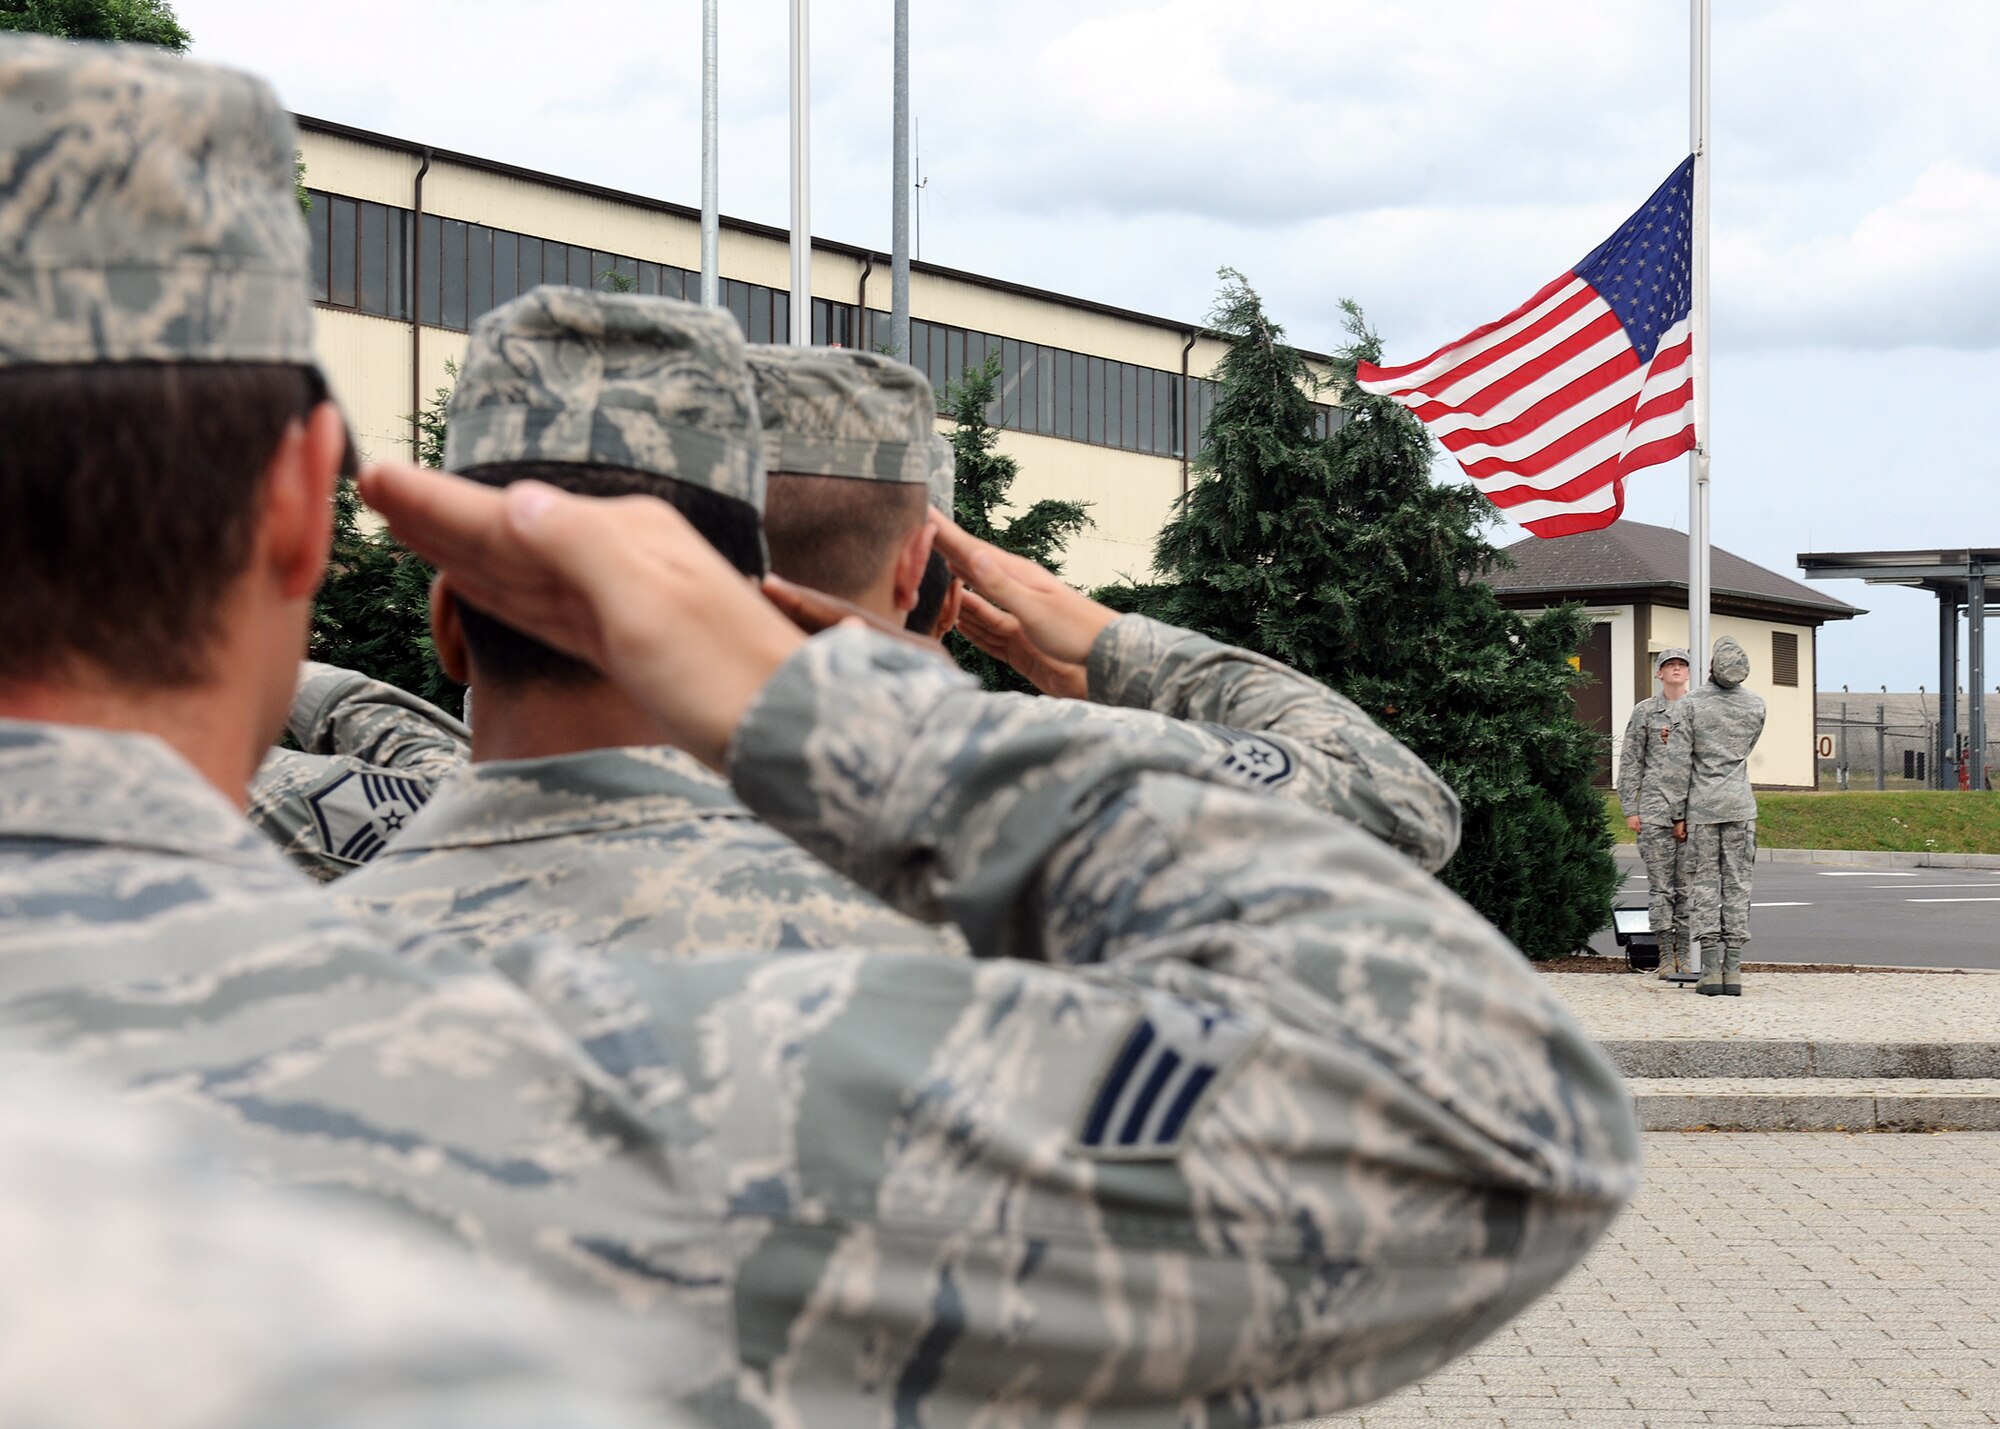 SPANGDAHLEM AIR BASE, Germany – Base members salute as honor guard members lower the U.S. flag at a new retreat ceremony July 29, 2013. U.S. Air Force Chief Master Sgt. Matthew Grengs, 52nd Fighter Wing command chief master sergeant, initiated the base-wide retreat ceremony as a way for Spangdahlem Airmen to demonstrate military customs and courtesies. (U.S. Air Force photo by Staff Sgt. Daryl Knee/Released)